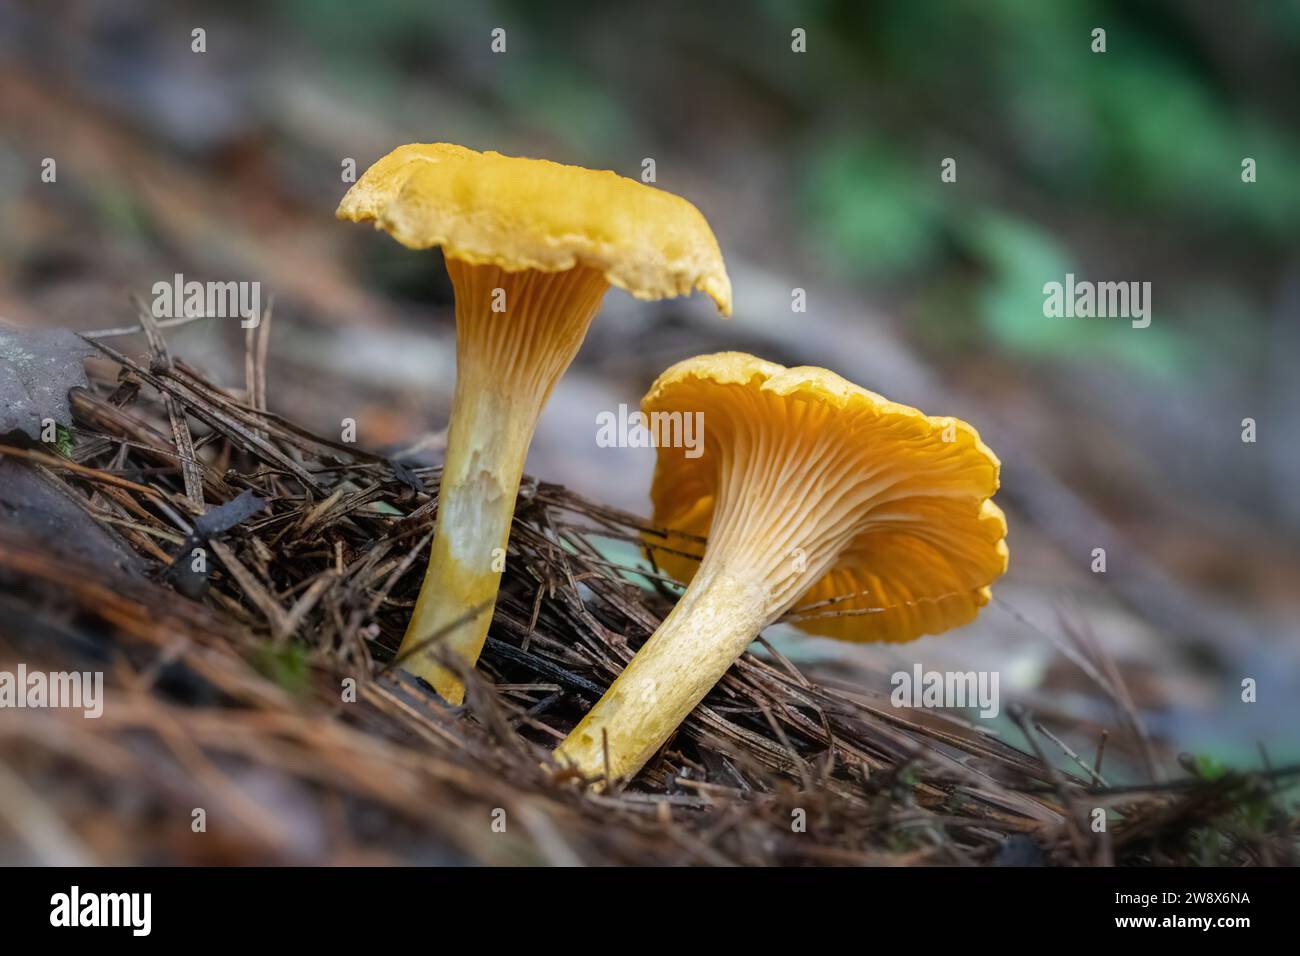 Two yellow chanterelles mushrooms growing on forest ground Stock Photo